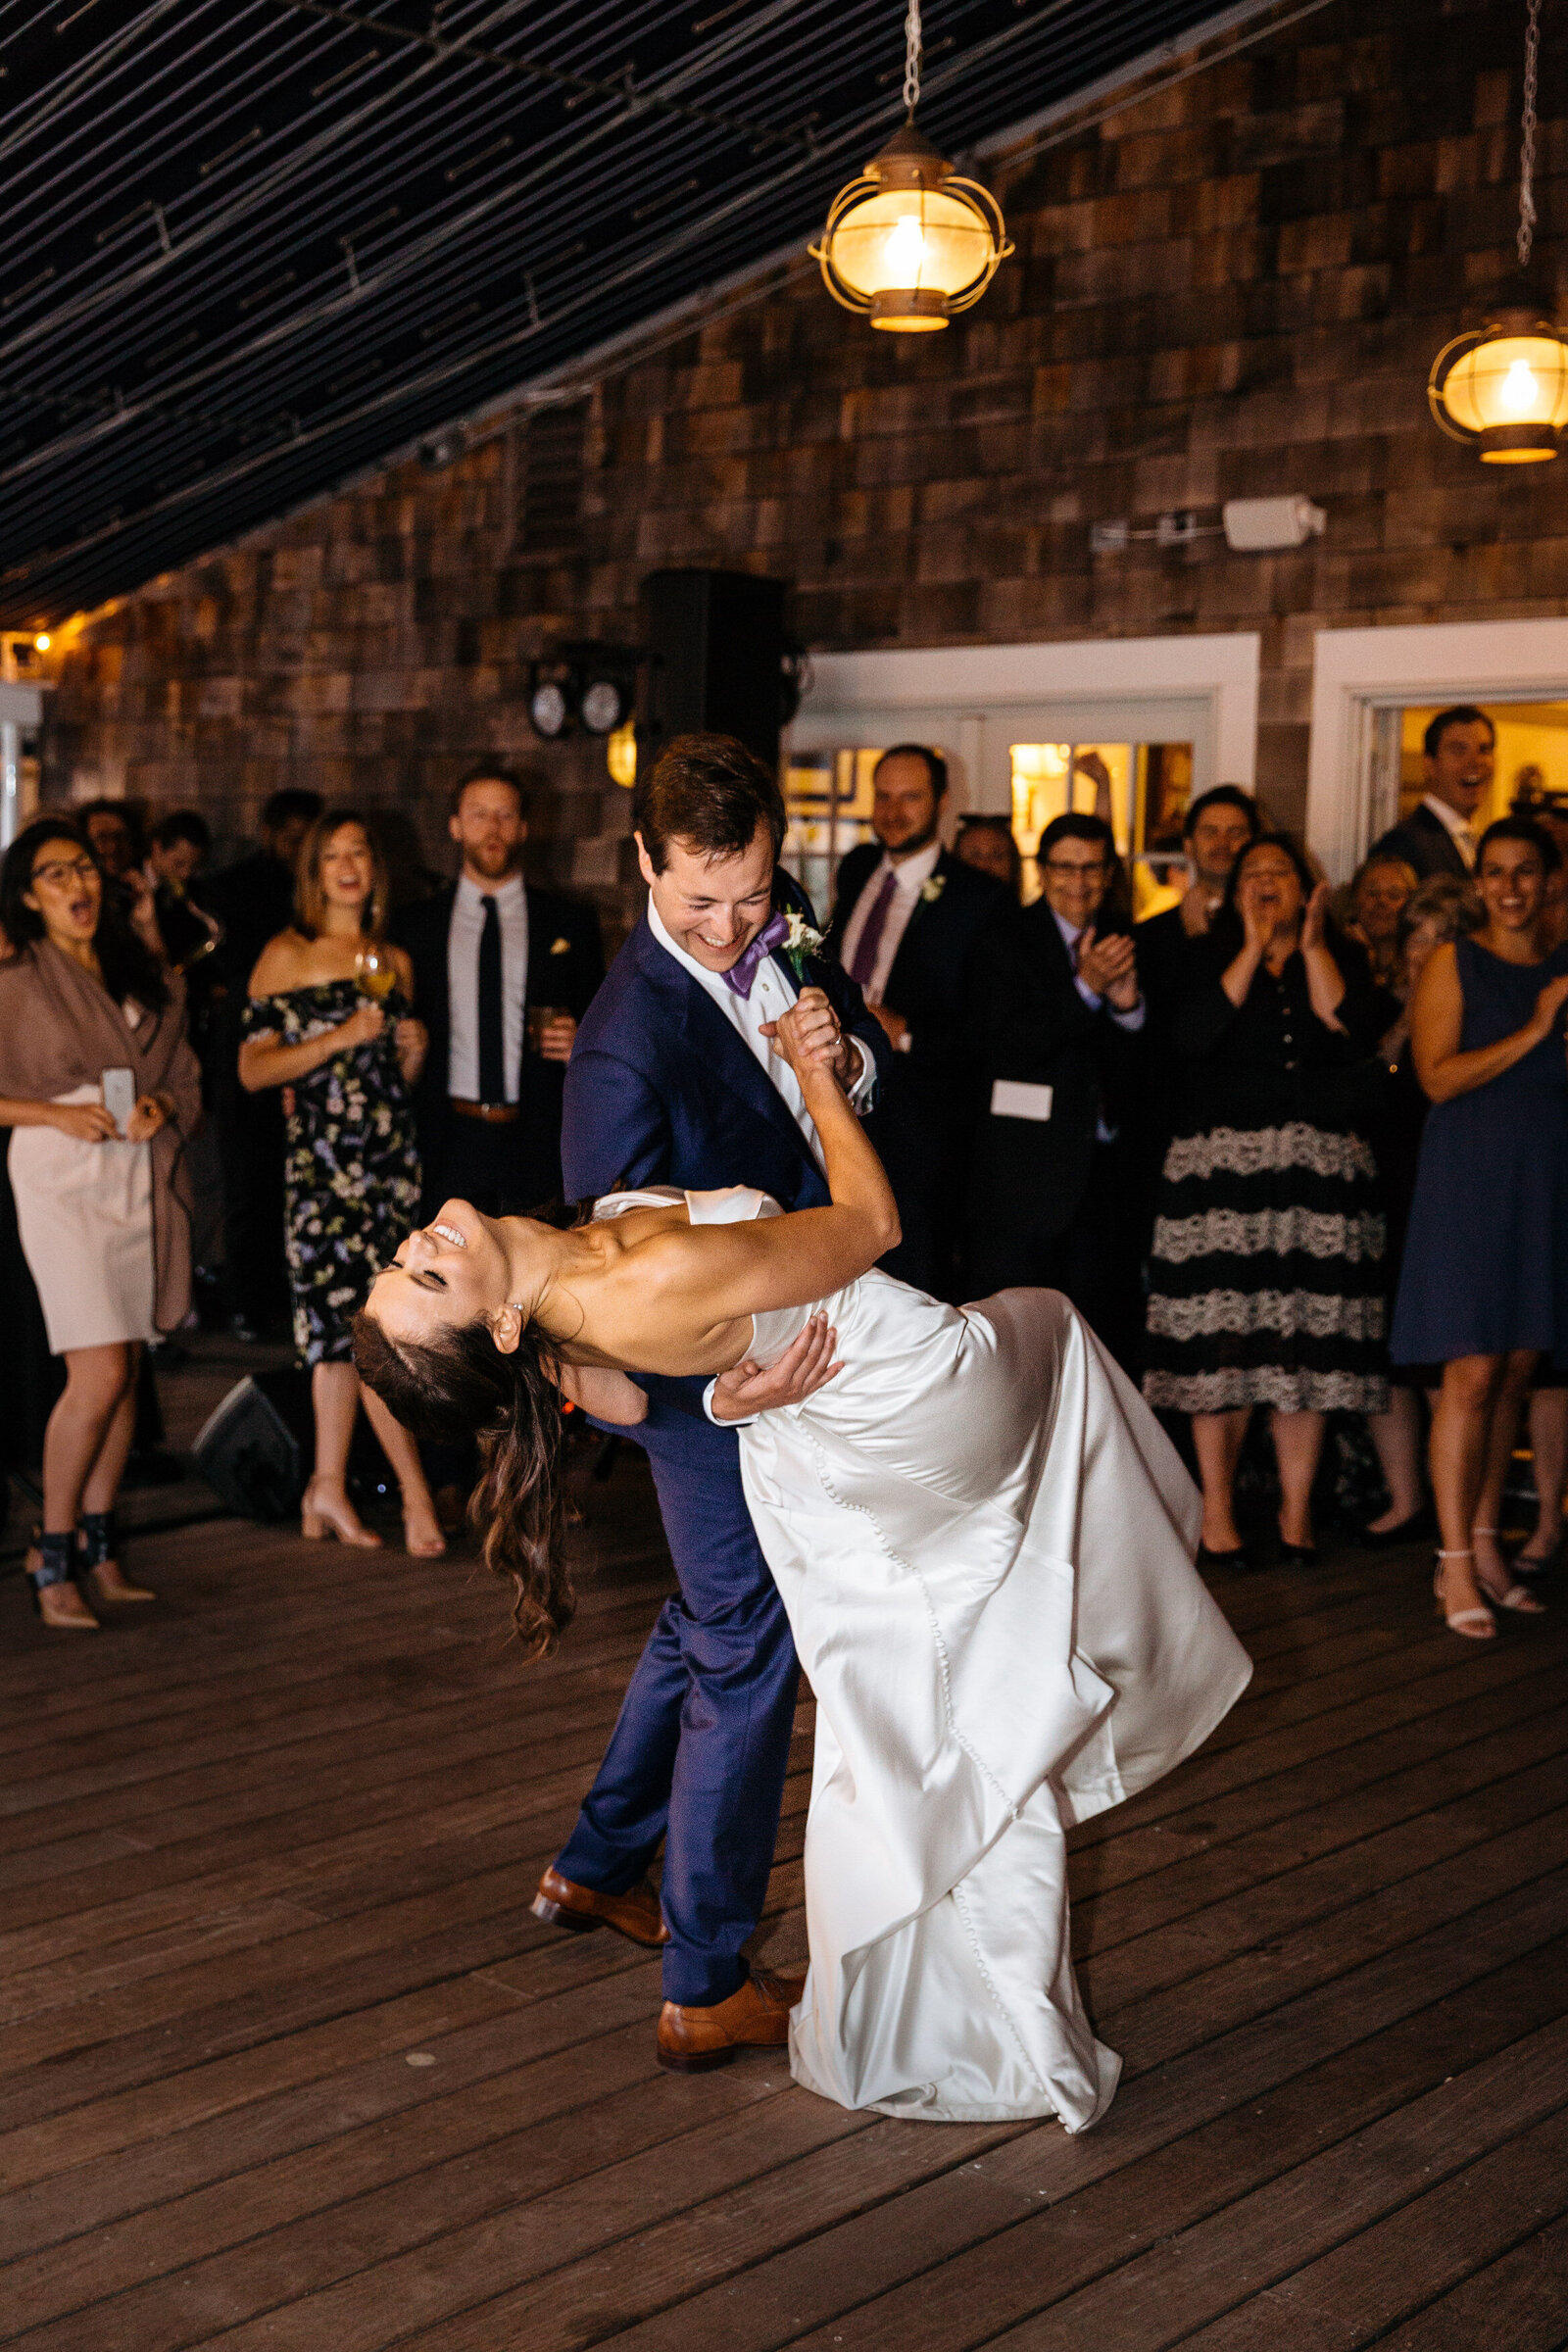 A groom dipping a bride during their first dance.